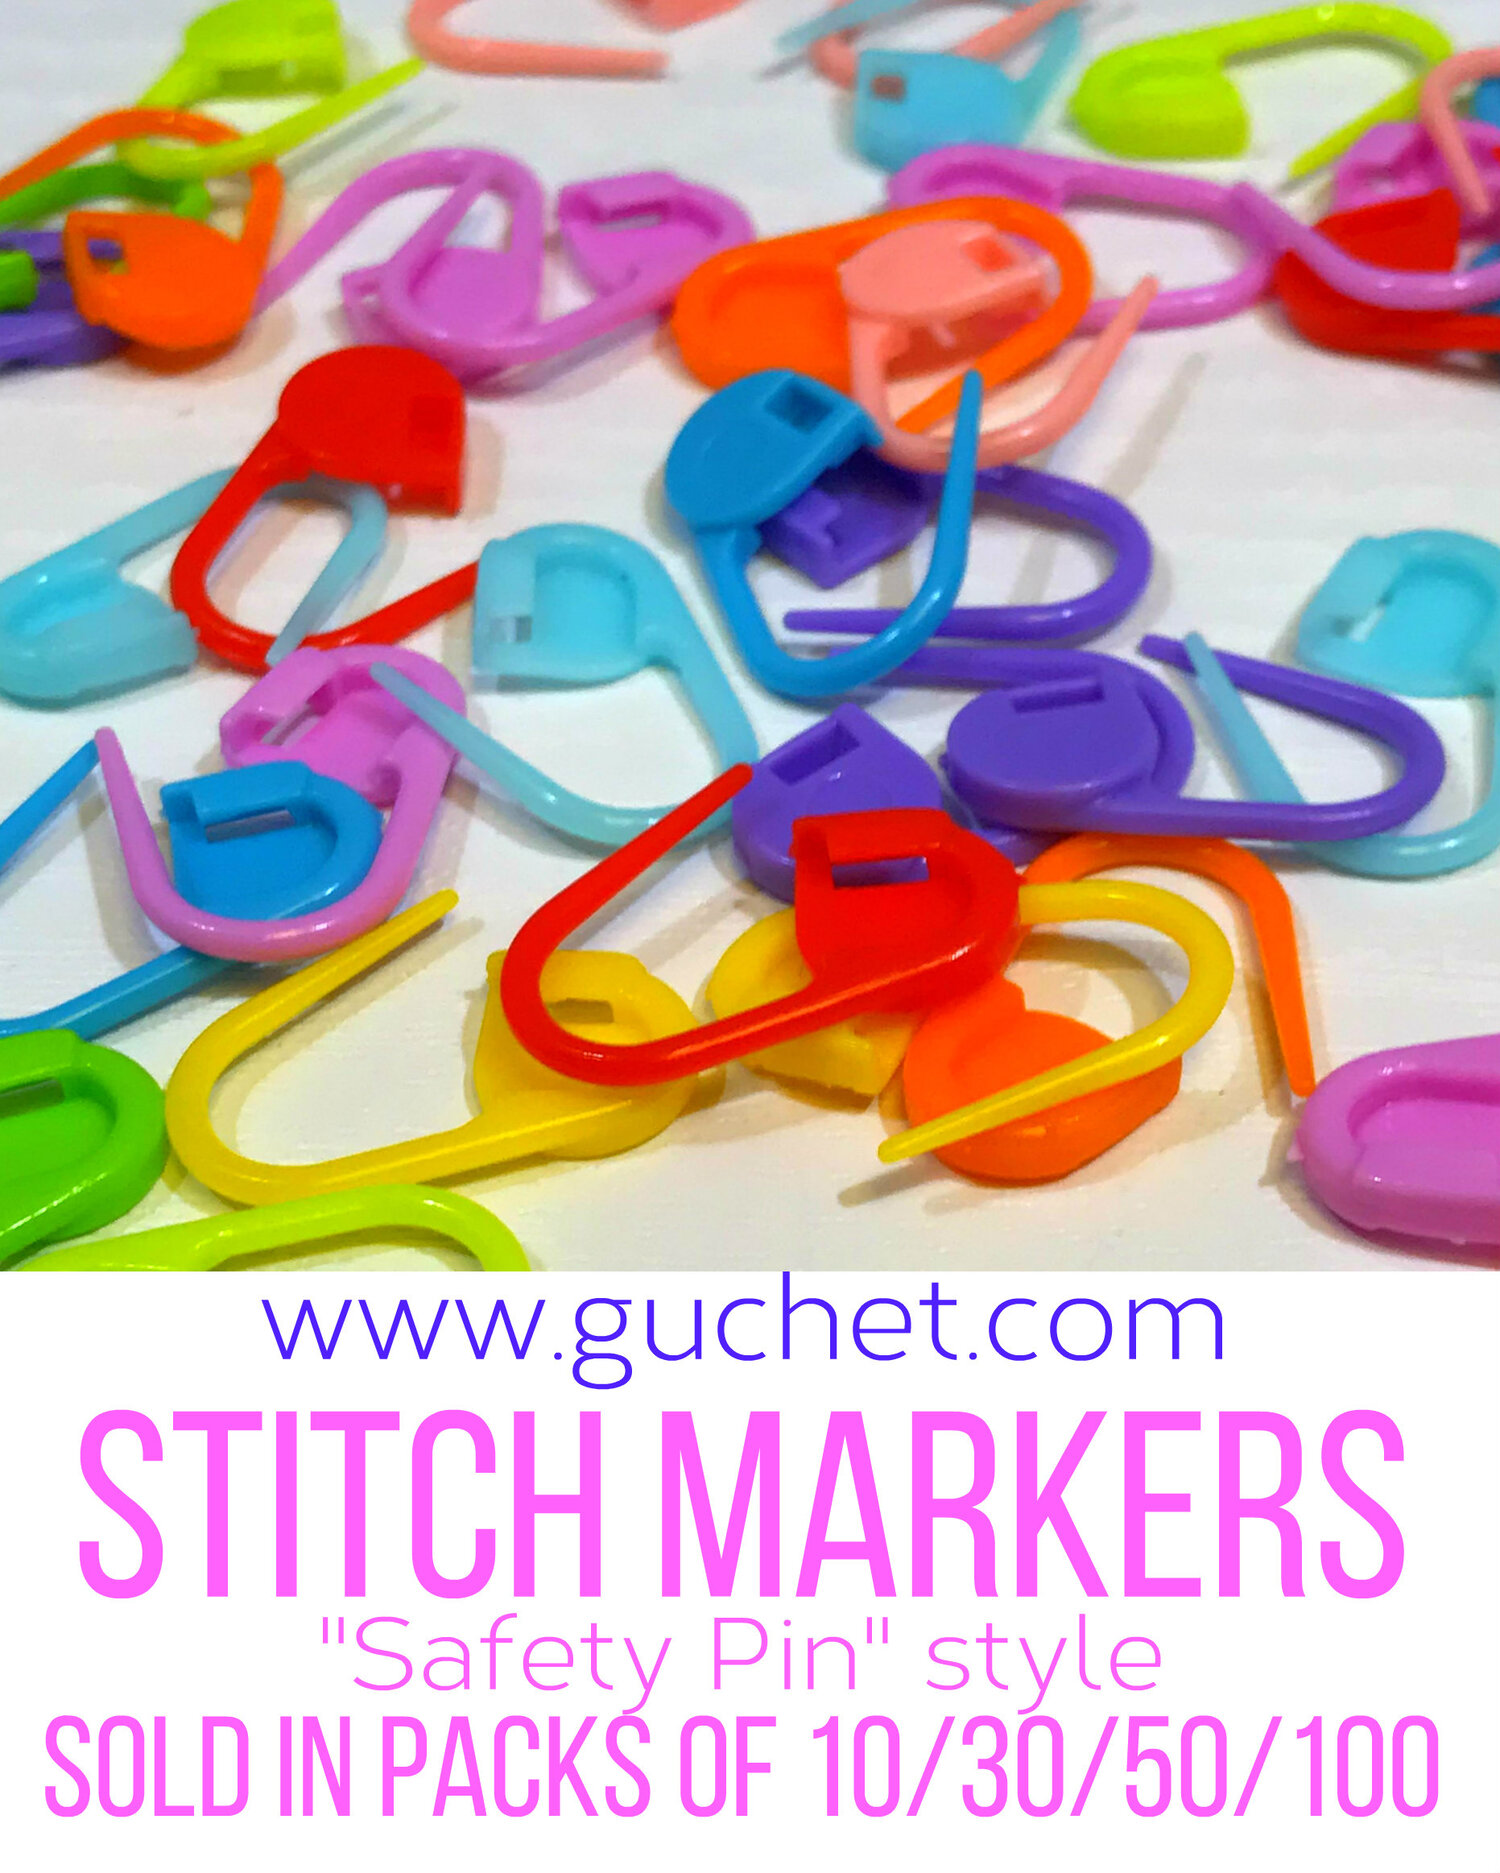 STITCH MARKERS - PLASTIC SAFETY PIN STYLE — YARNS, PATTERNS, ACCESSORIES